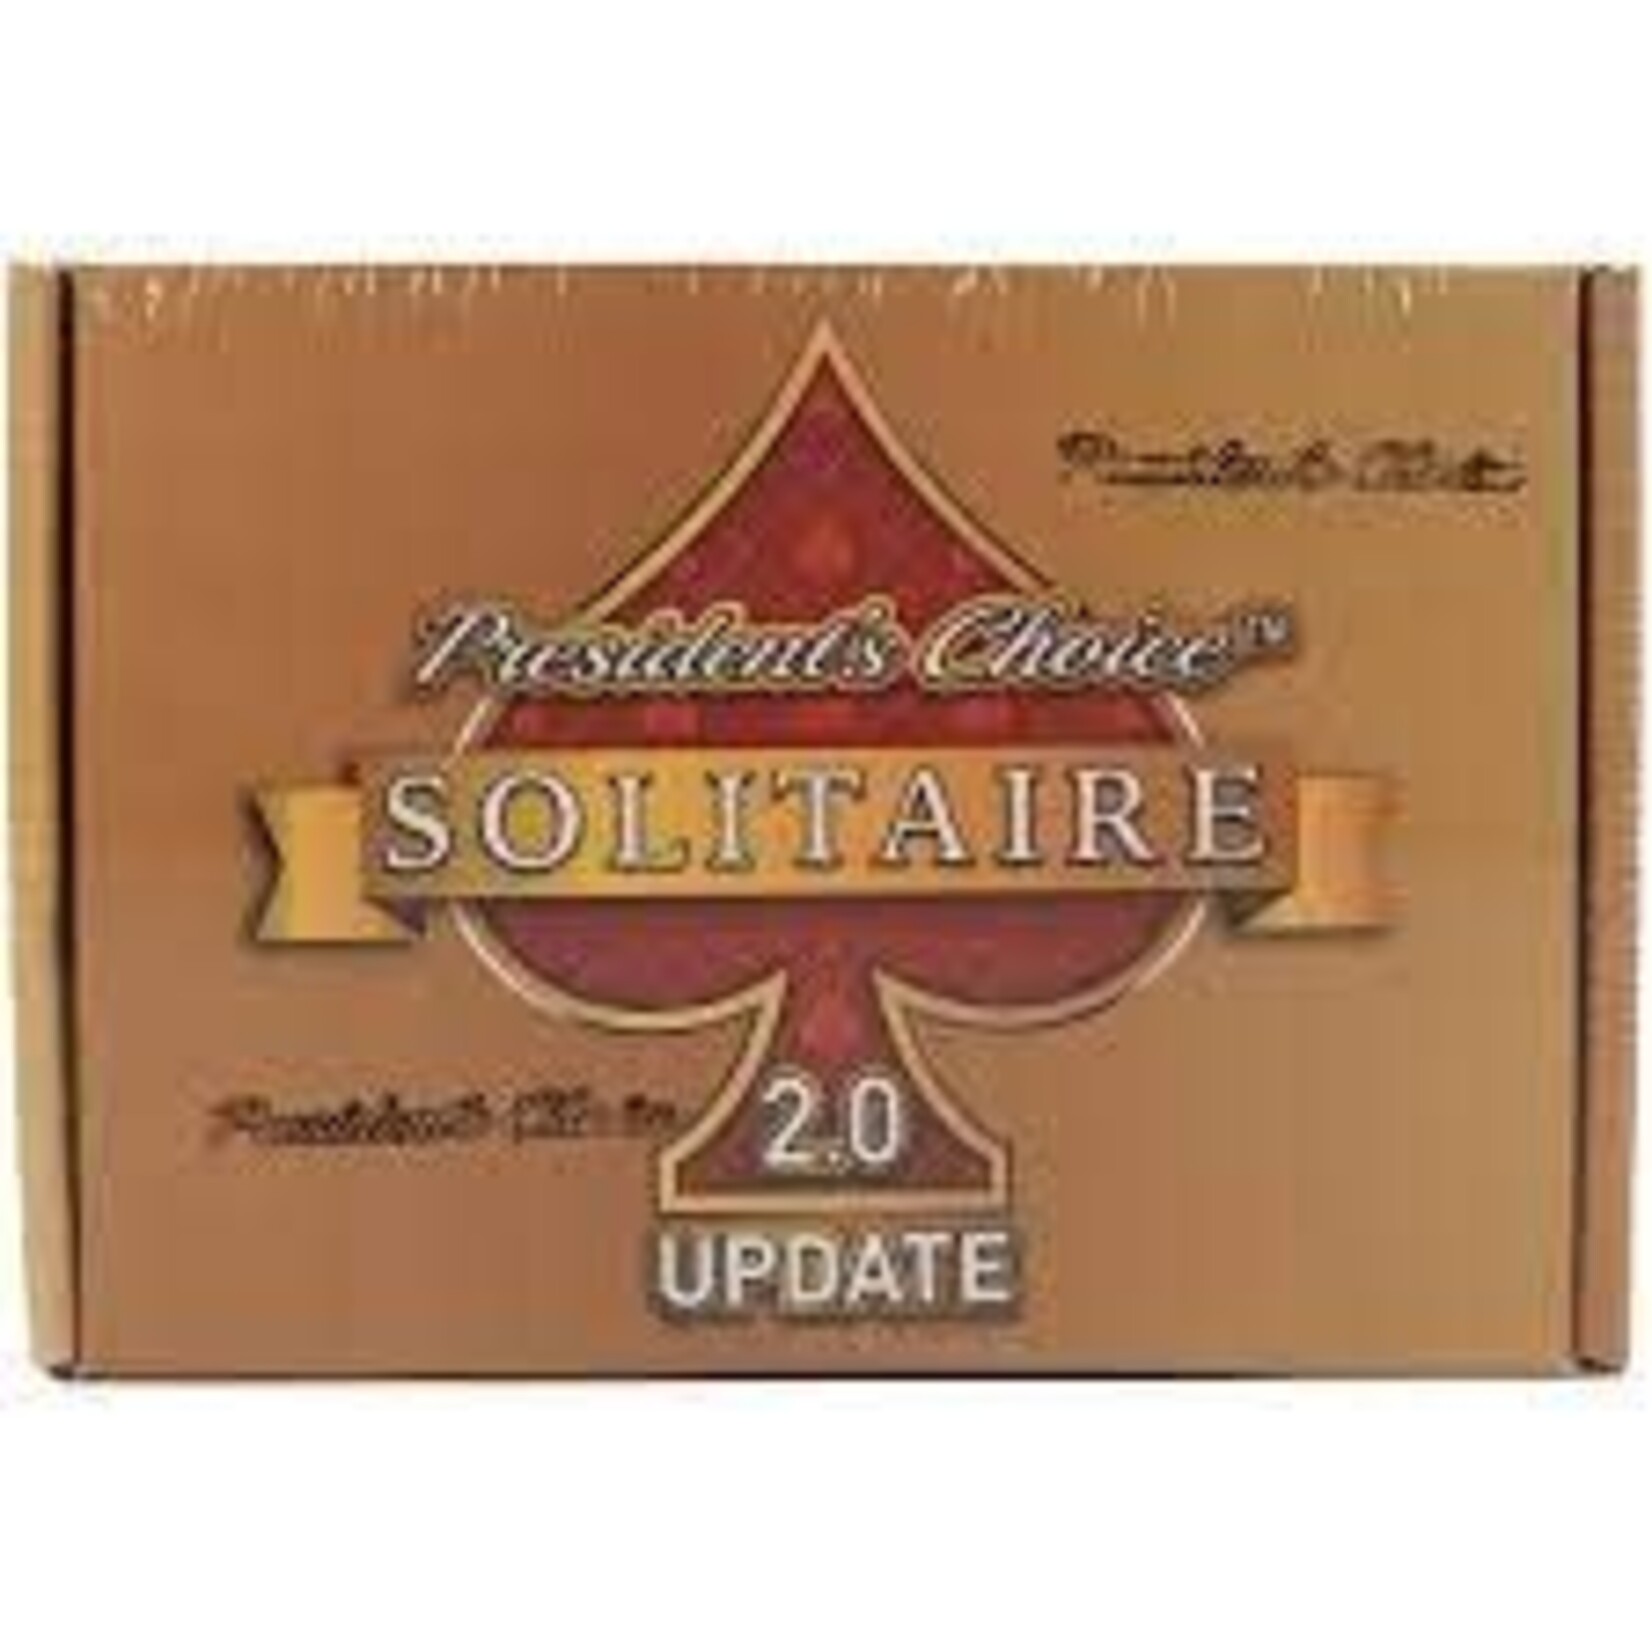 President's Choice President’s Choice Solitaire 2.0 Update